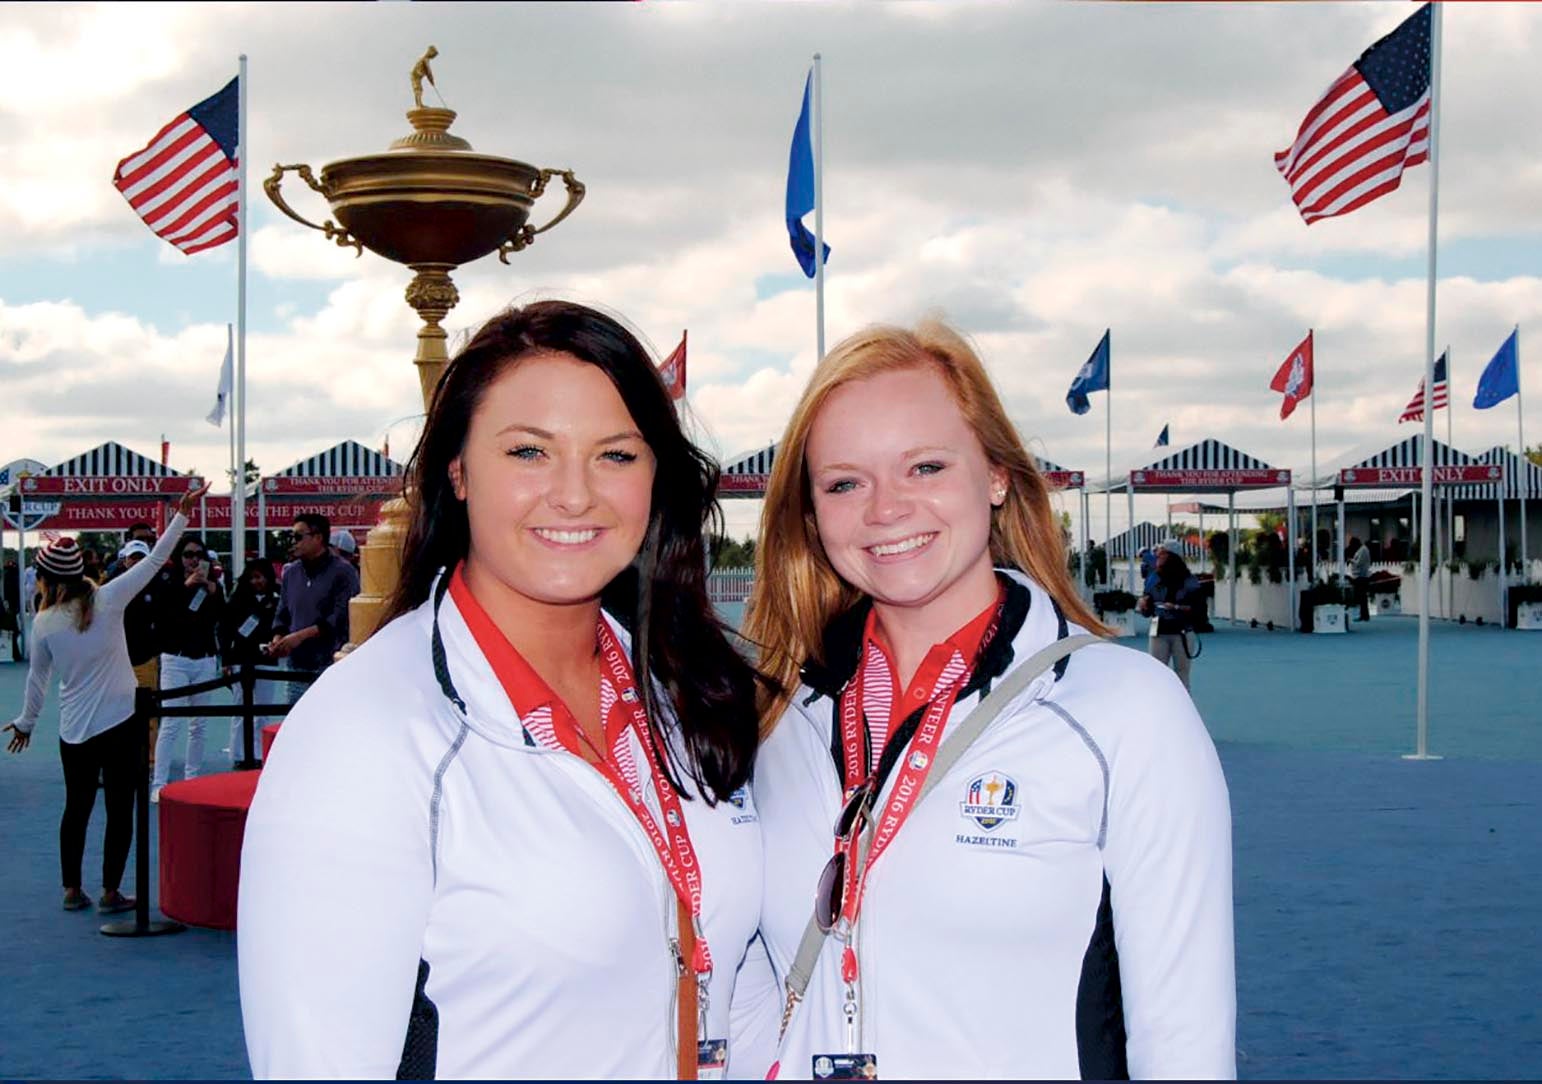 Camille Anderson is pictured with Kelsey Hanefield during their interships with the Ryder Cup. Photo provided